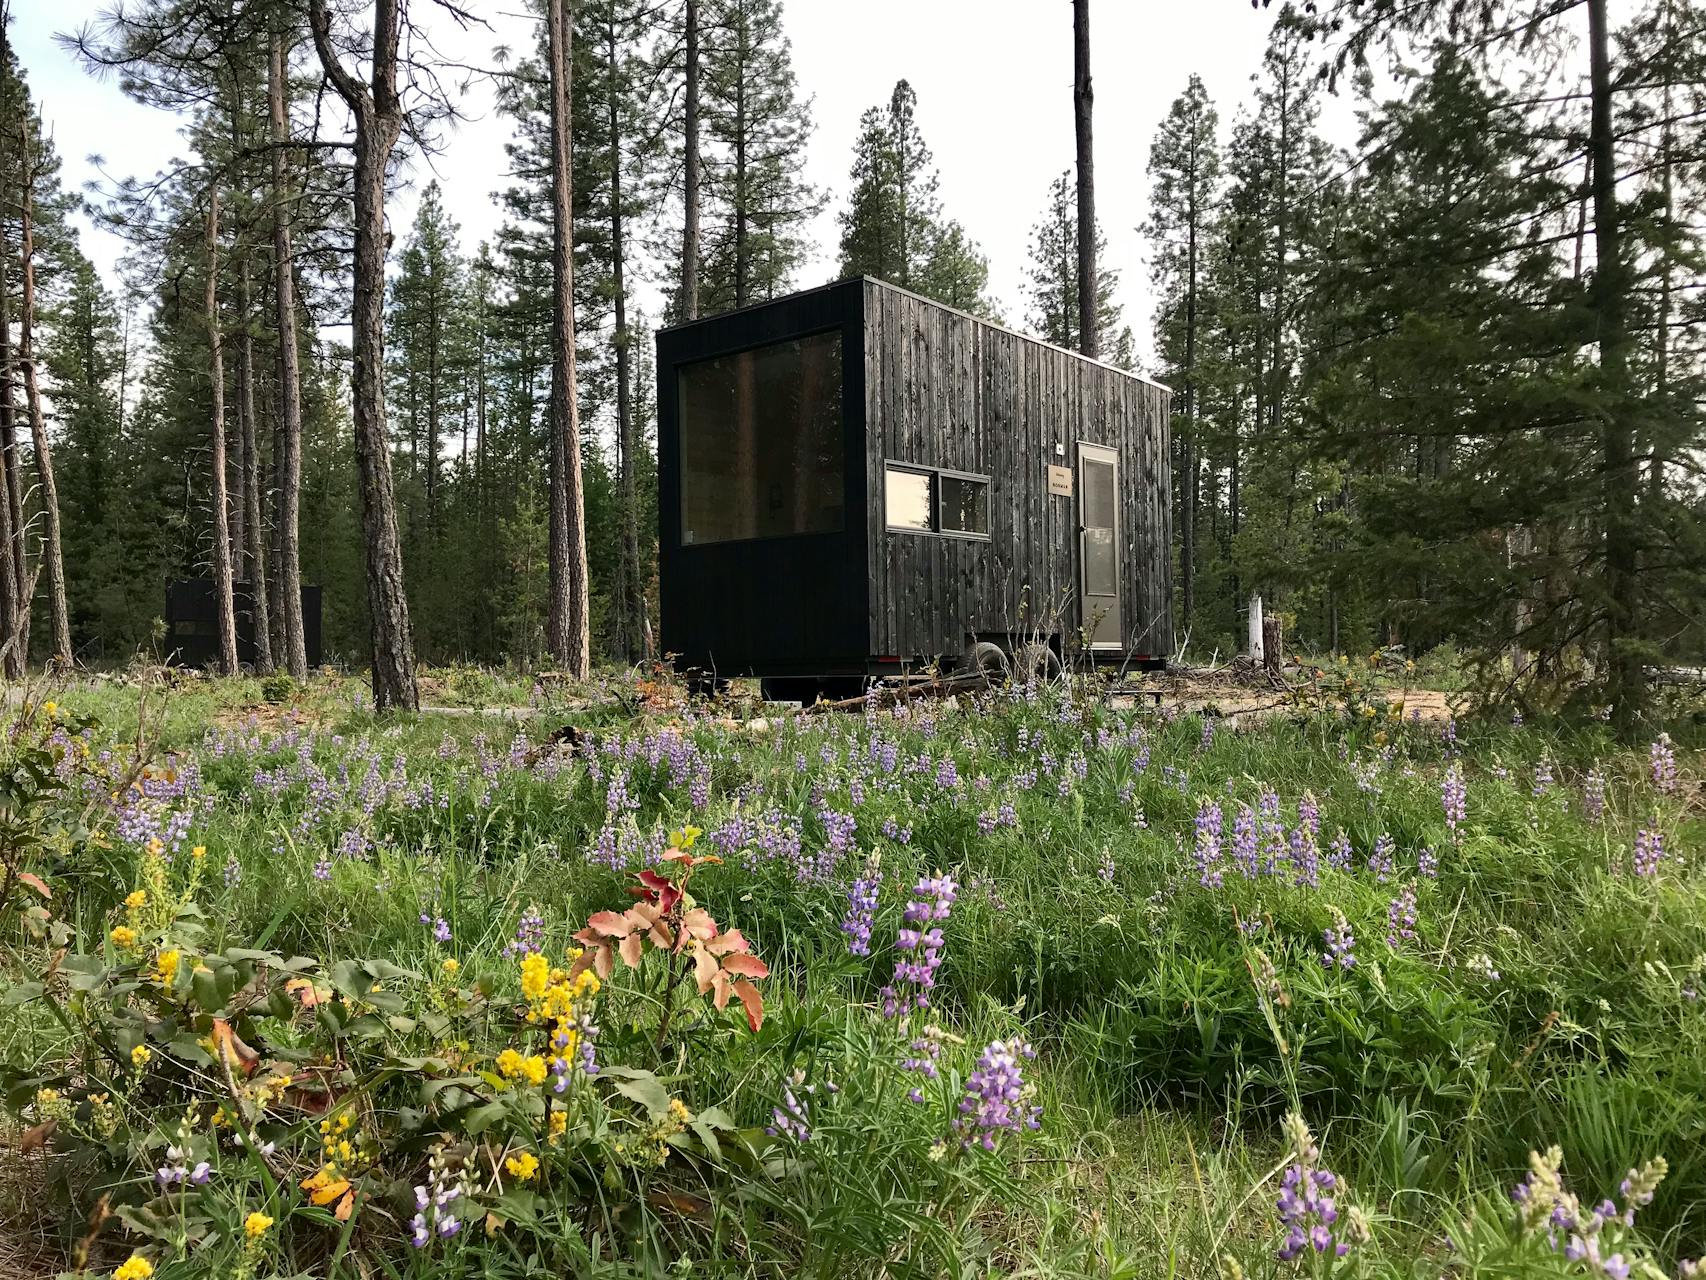 Jon Staff and Pete Davis launched Getaway, tiny black cabins with 30 “outposts” across the country.